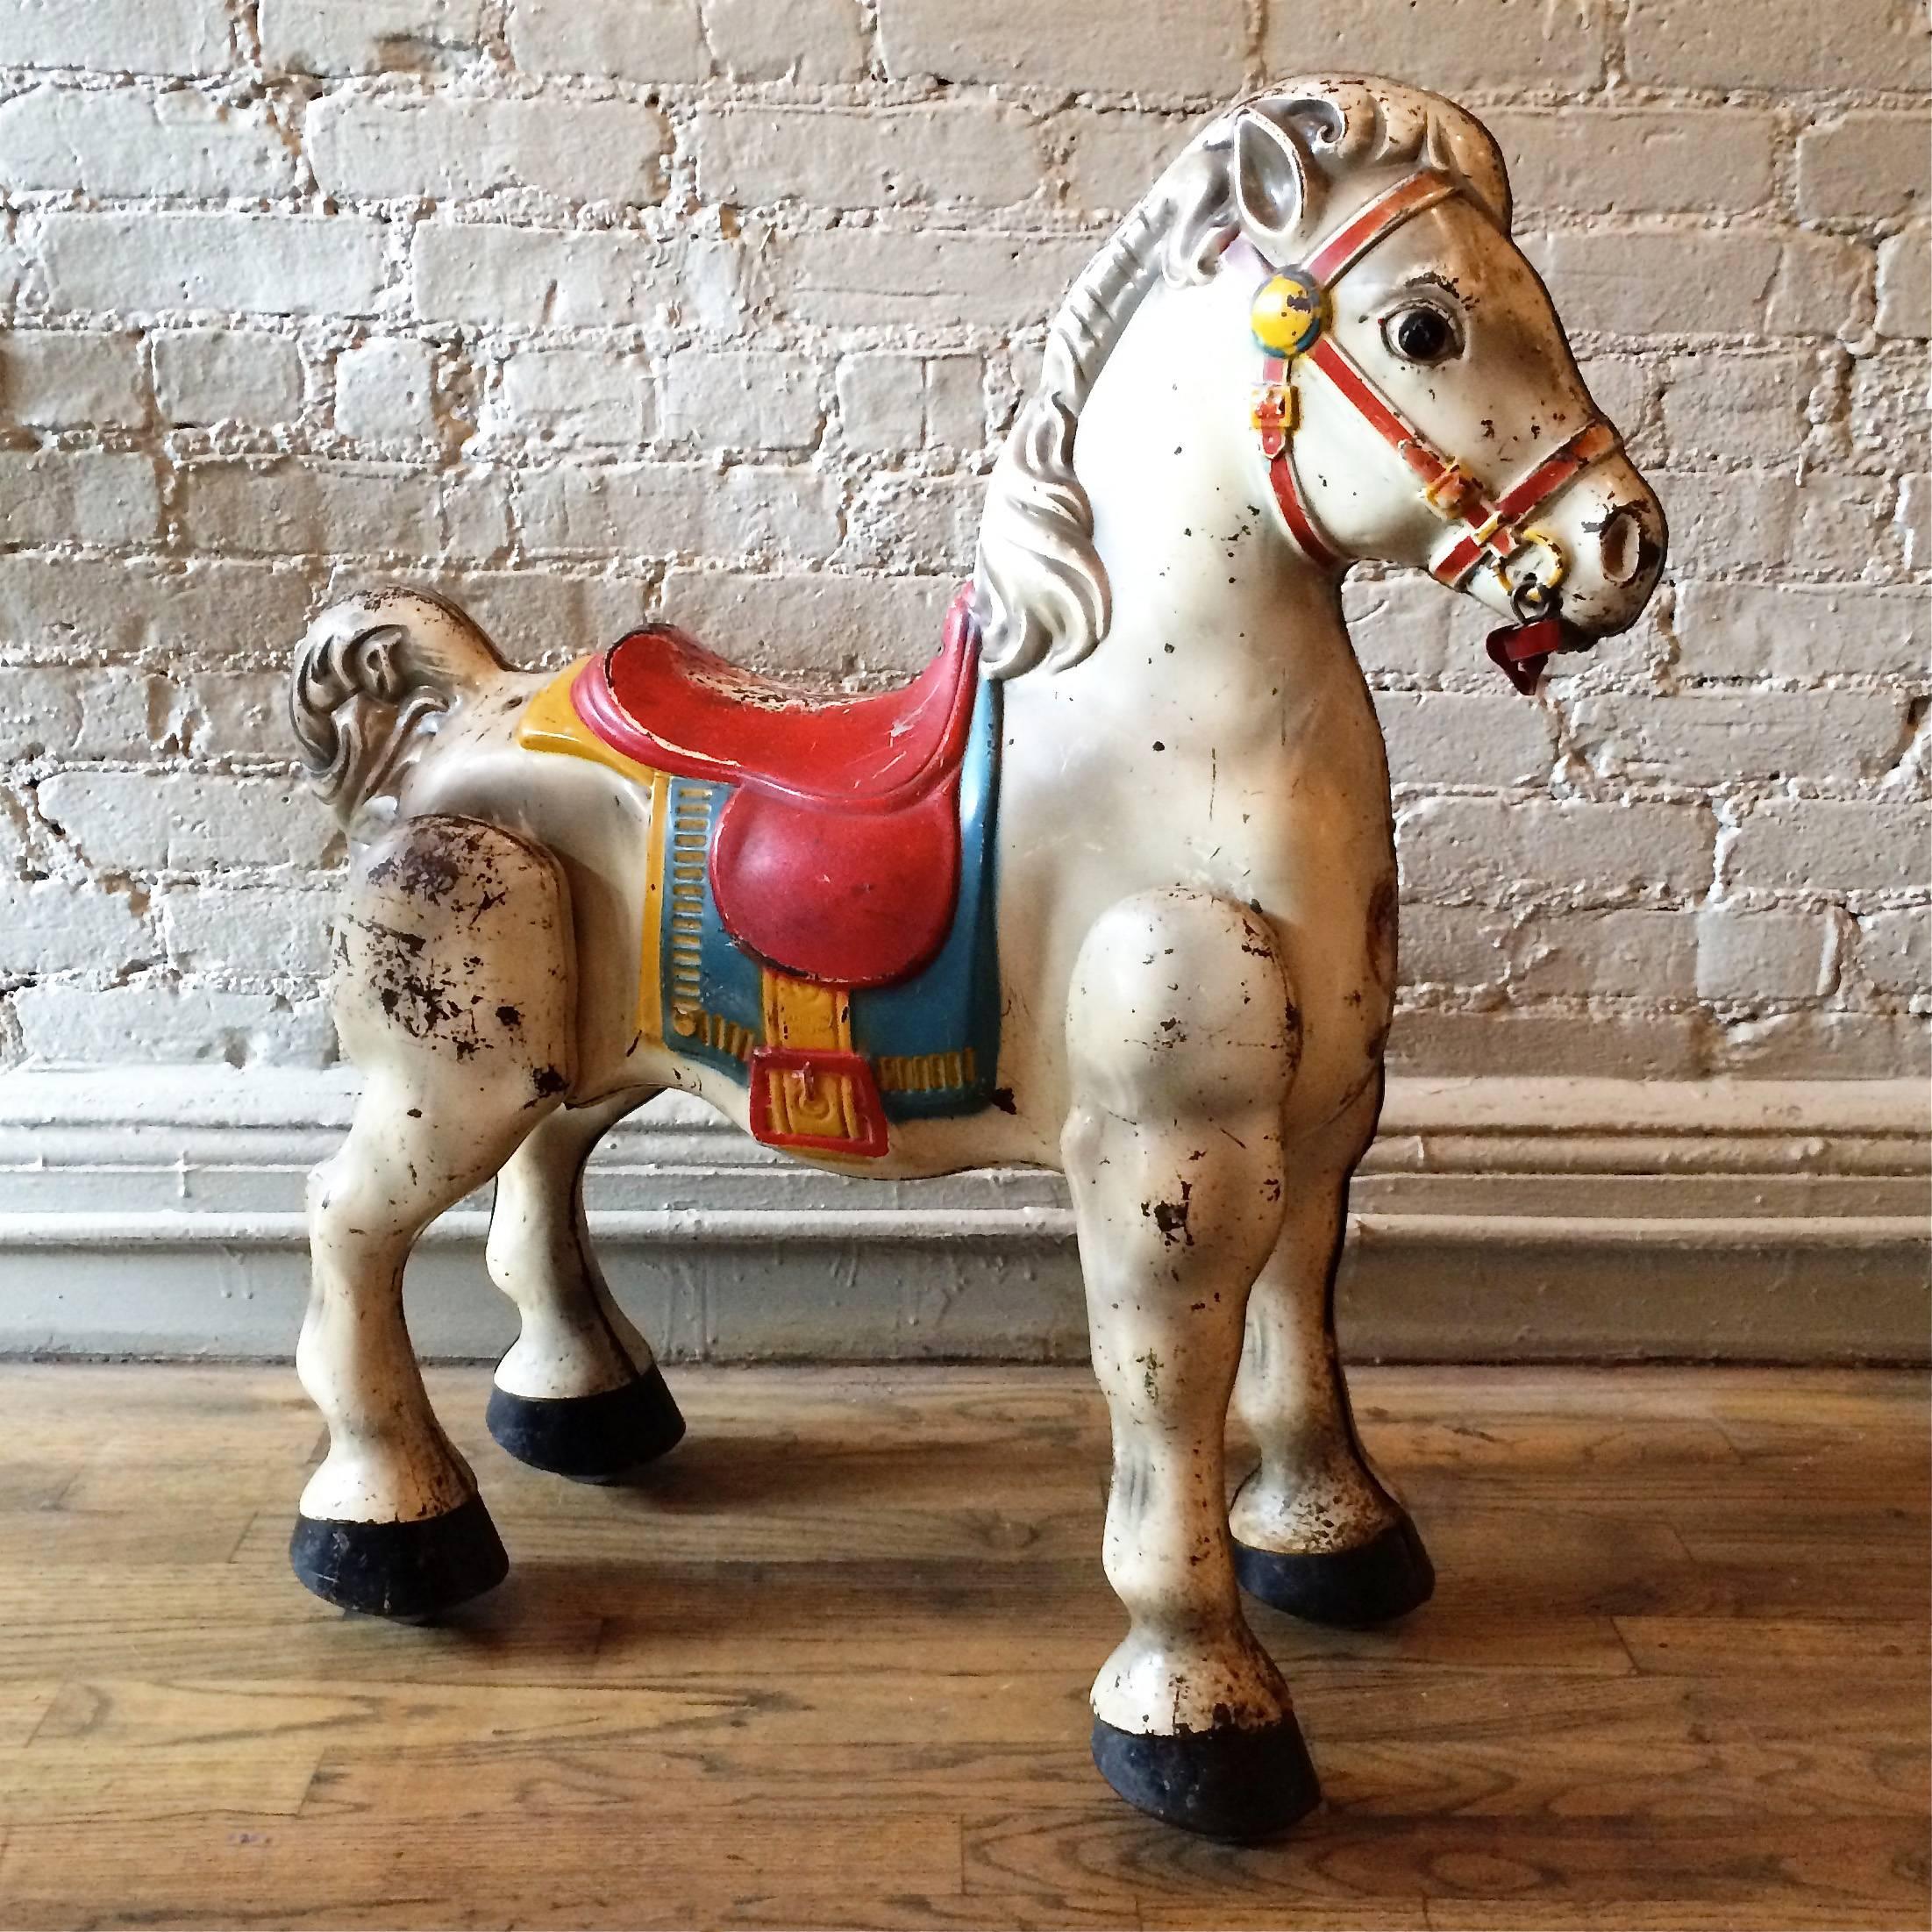 Vintage, 1940s, painted, pressed steel hobby horse manufactured by Mobo Toys, England with casters on feet and excellent patina.